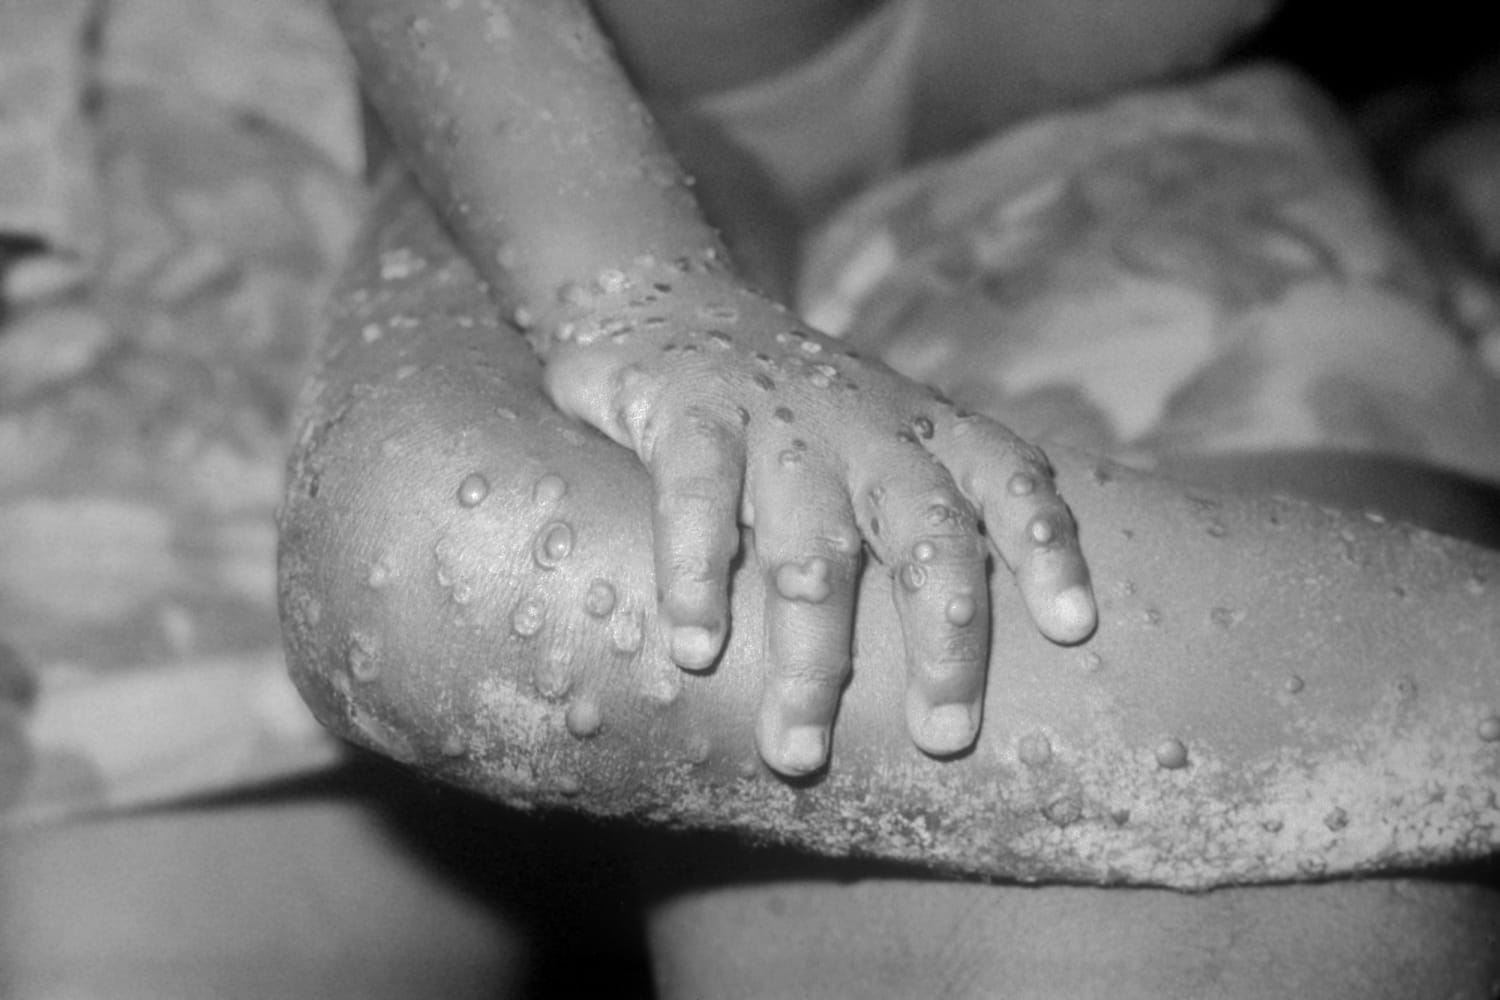 WHO calls emergency meeting as monkeypox cases many